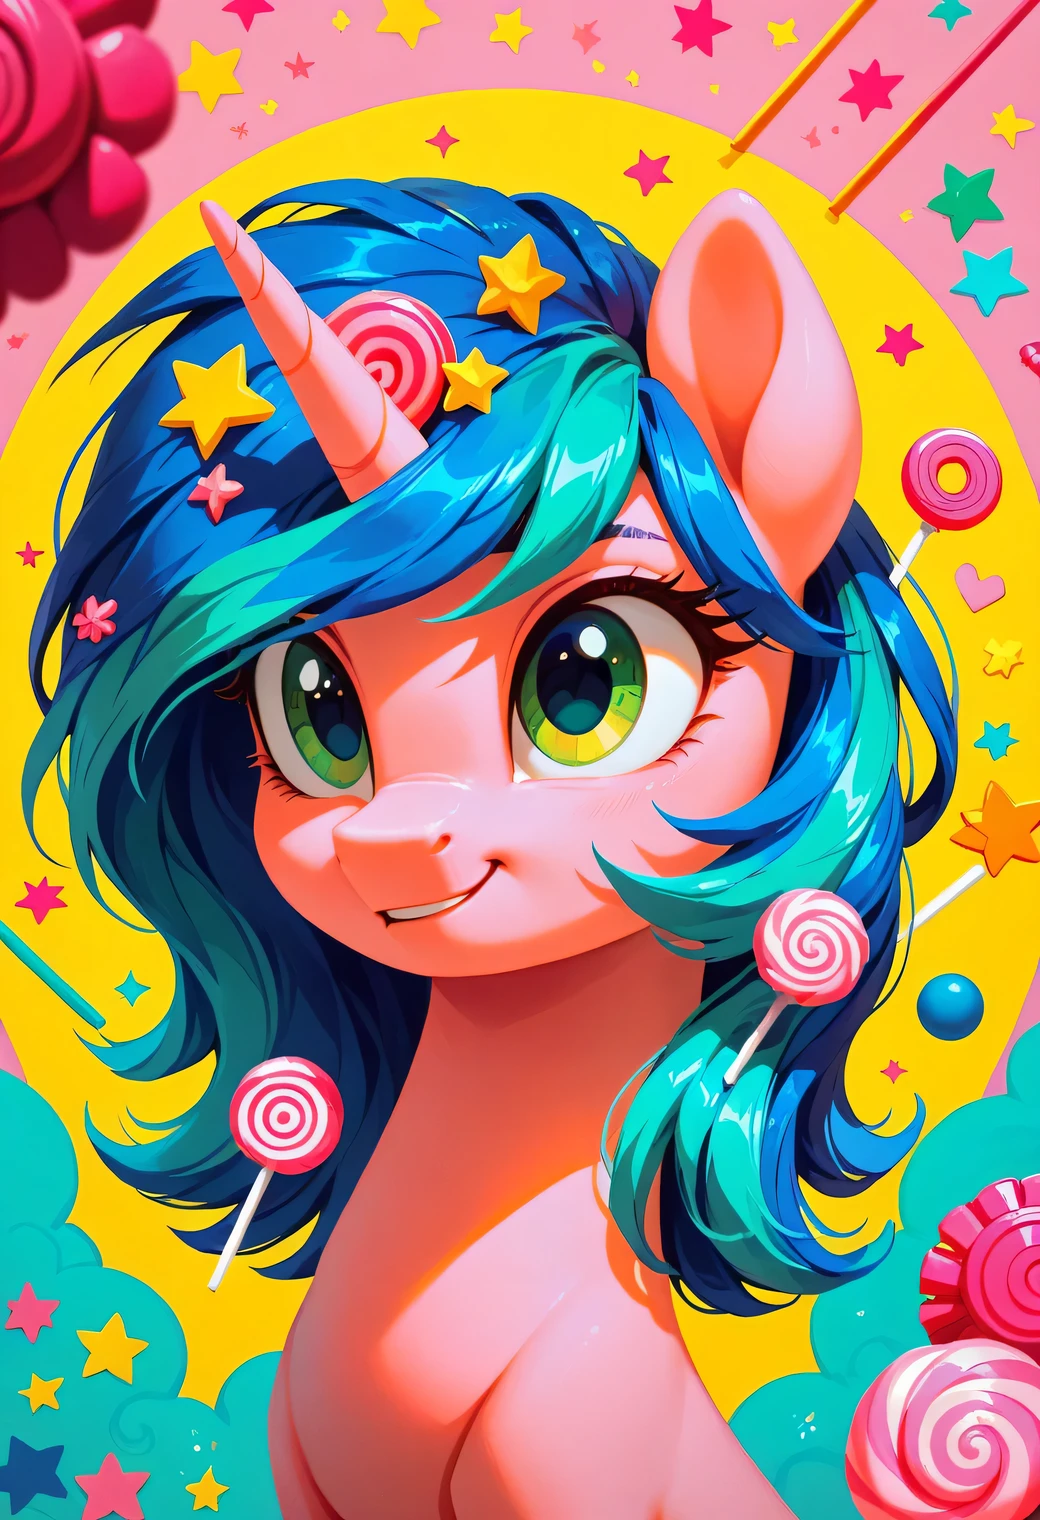 score_9, score_8_up, score_7_up,  ral-ltlpowny, pink candy, female pony, pink and blue mane, green eyes, aesthetic, kawaii background